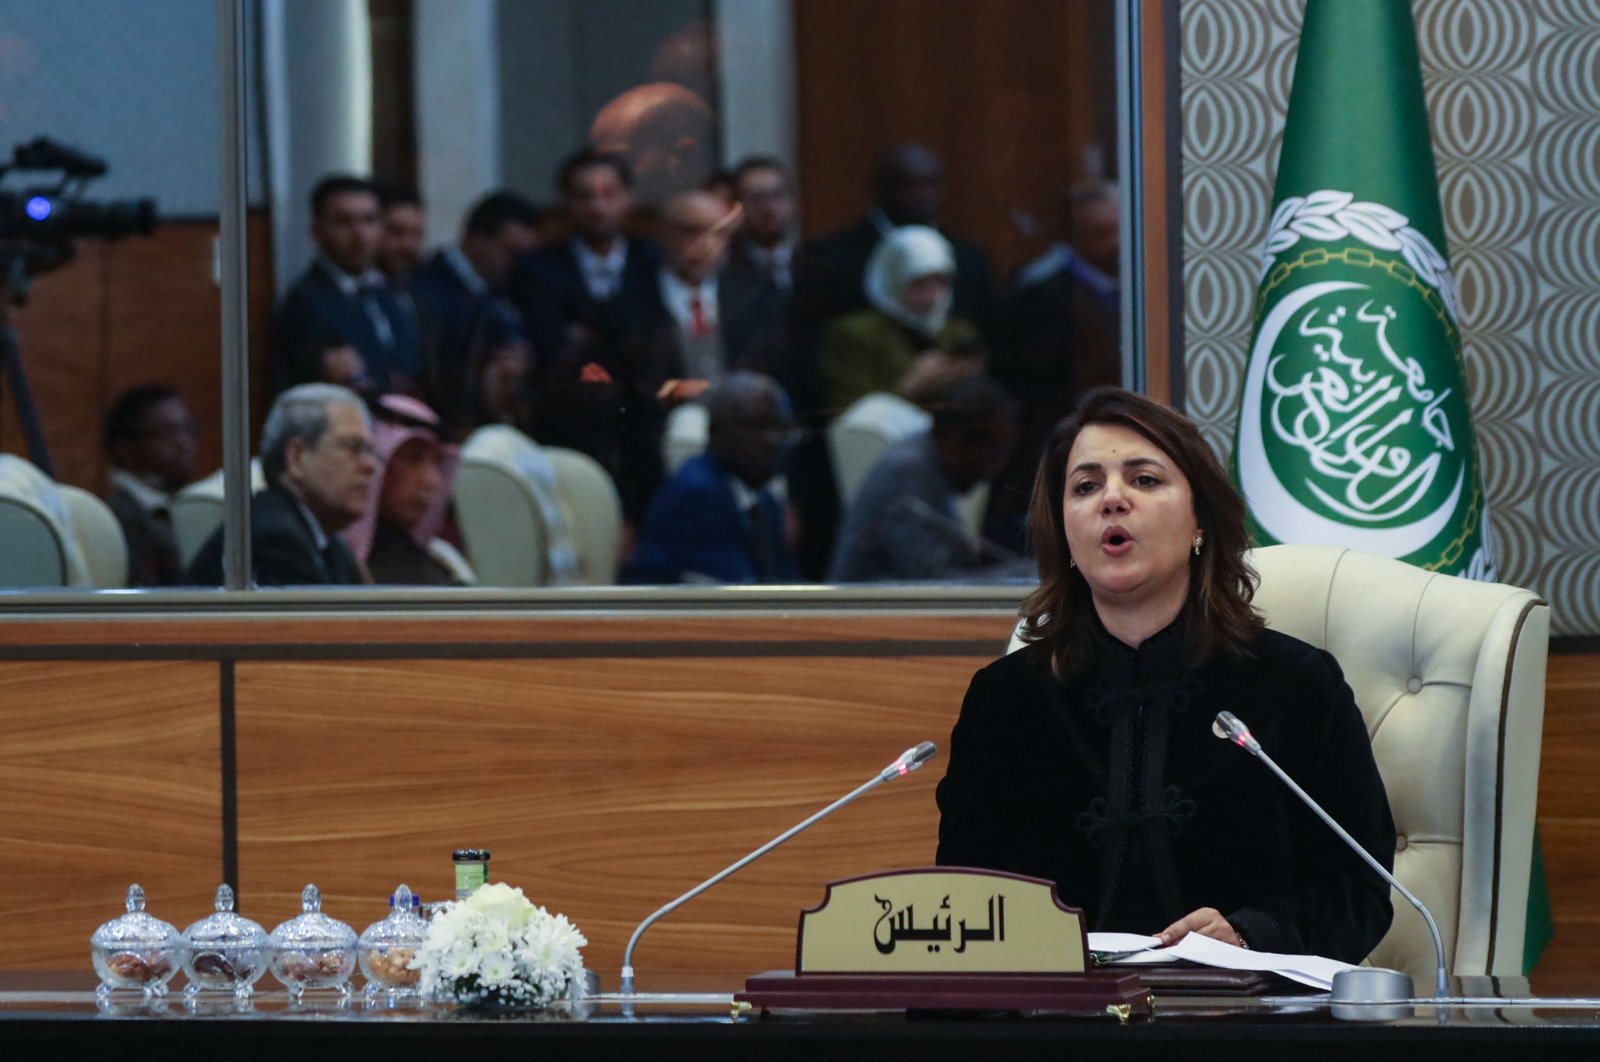 Libyan Foreign Affairs Minister Najla Mangoush speaks at the opening session of the meeting of Arab foreign ministers, in the capital Tripoli, Libya, Jan. 22, 2023. (AFP Photo)